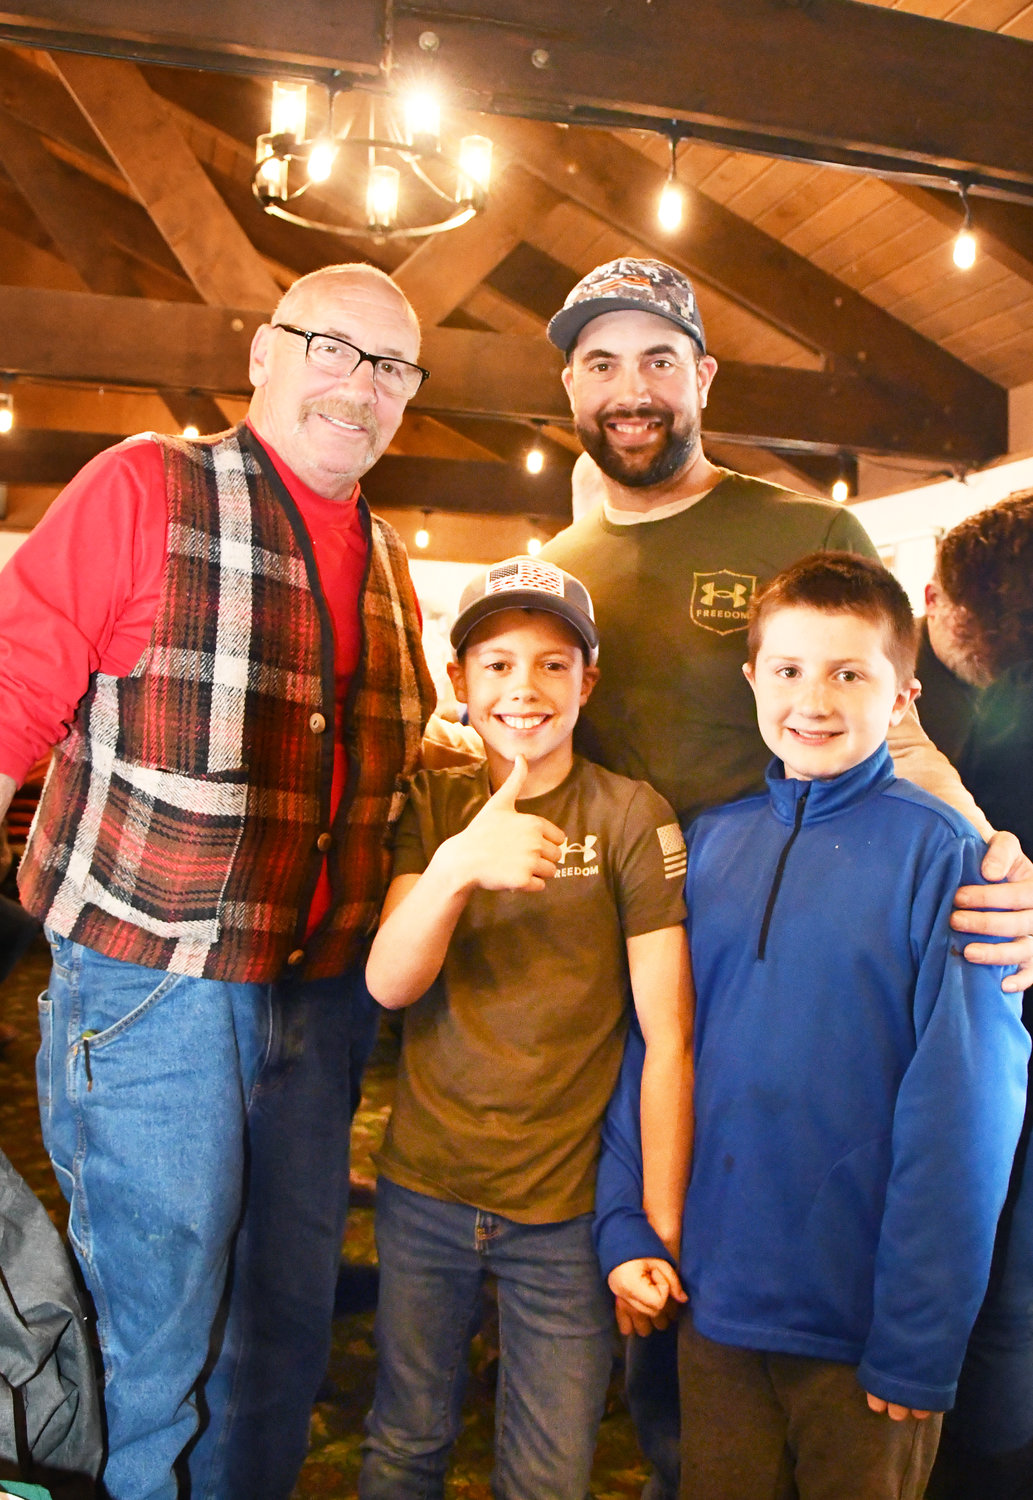 Three generations of the Darder family enjoyed Sunday’s fundraiser and took home some great prizes, too. From the left are Mike Darder, his grandson Jack, son Forest and second cousin Hudson Brigham.